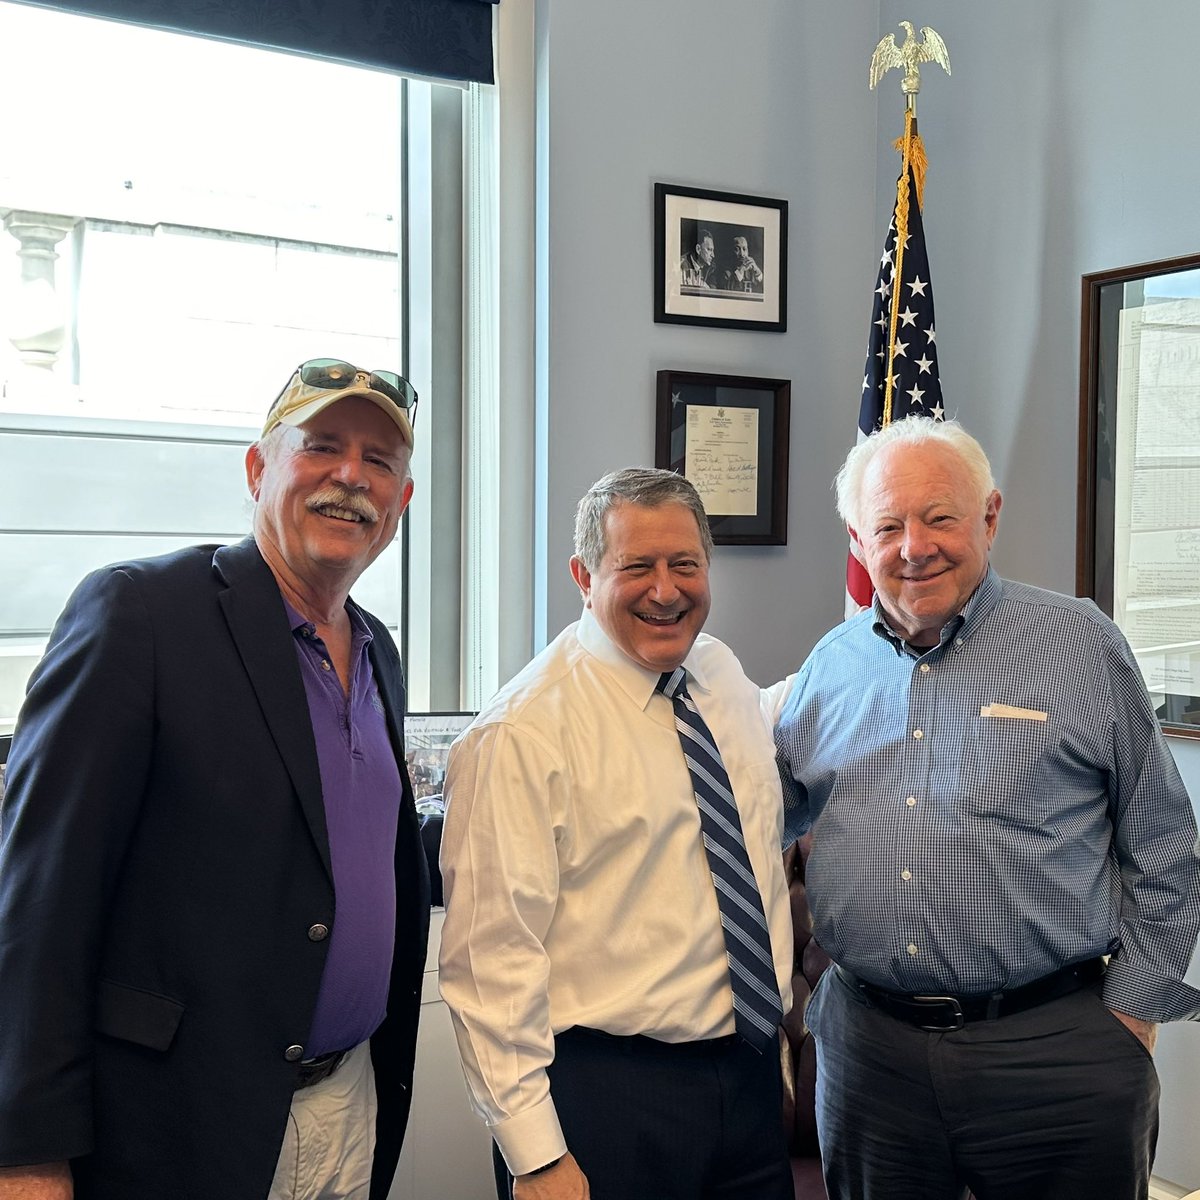 Today I met with leaders from Finger Lakes wineries to discuss our work to support farmers and growers across New York State. Our region is home to so many world-class wineries. I'm committed to ensuring they have the support necessary to keep thriving.